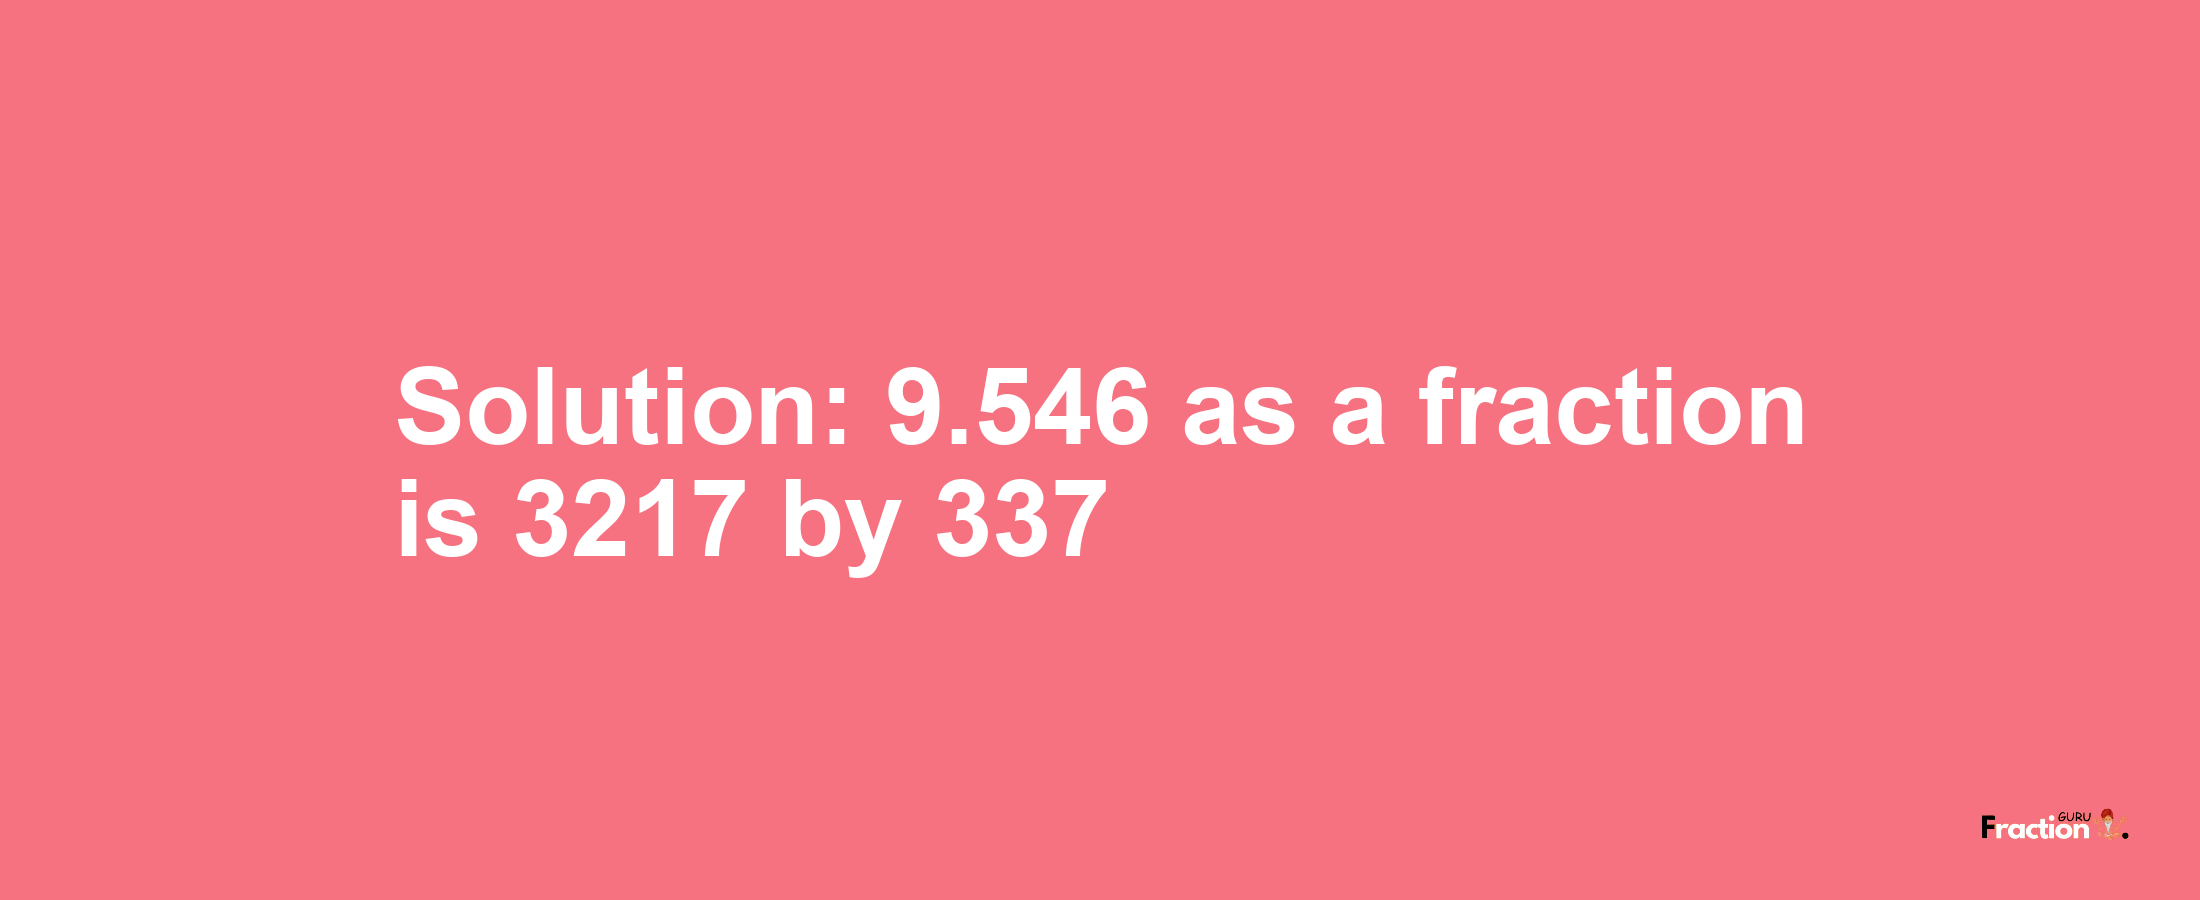 Solution:9.546 as a fraction is 3217/337